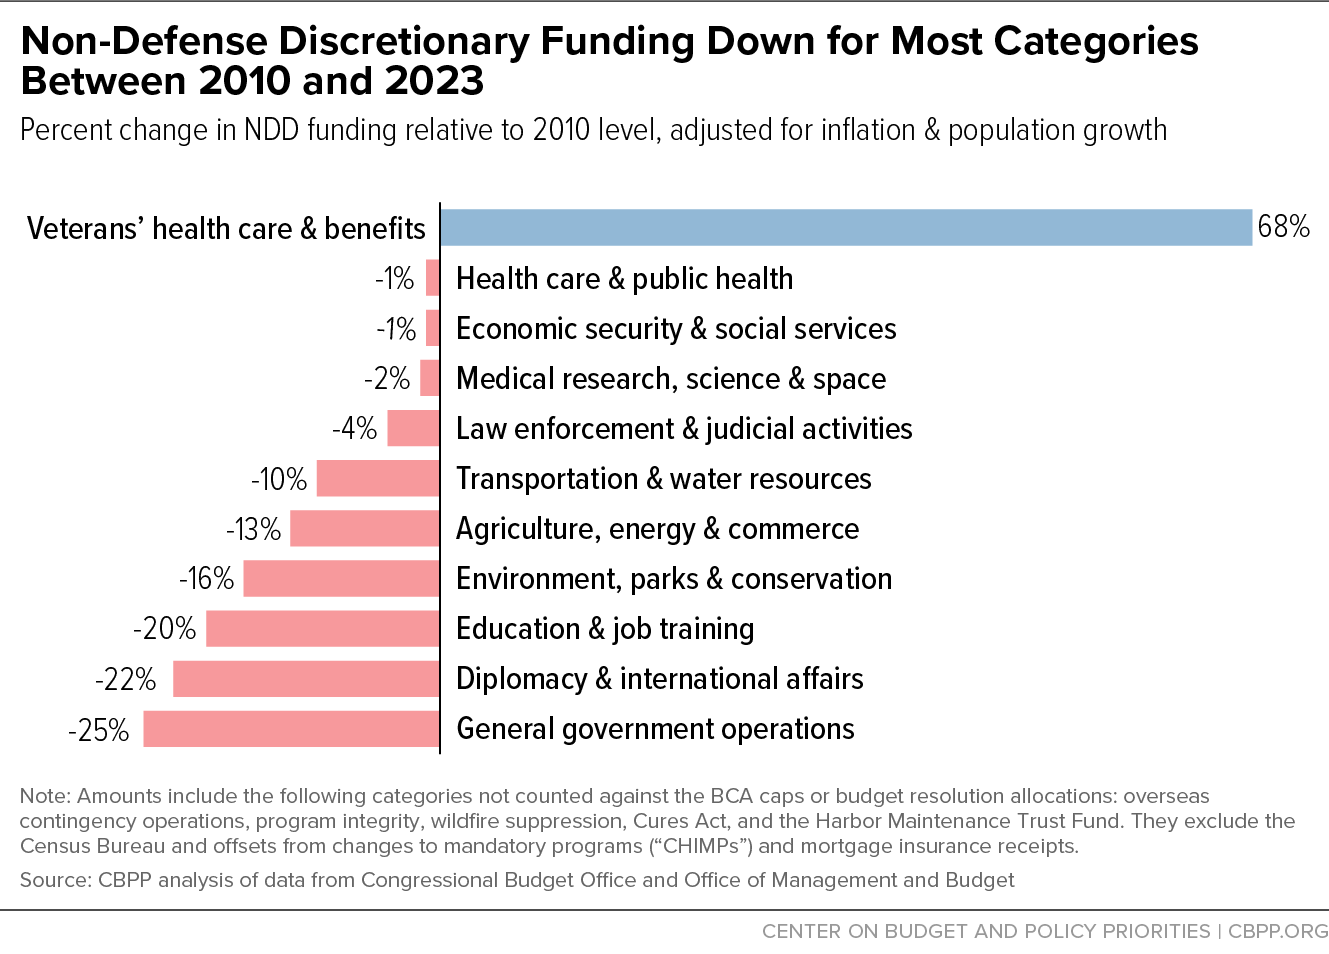 Non-Defense Discretionary Funding Down for Most Categories Between 2010 and 2023